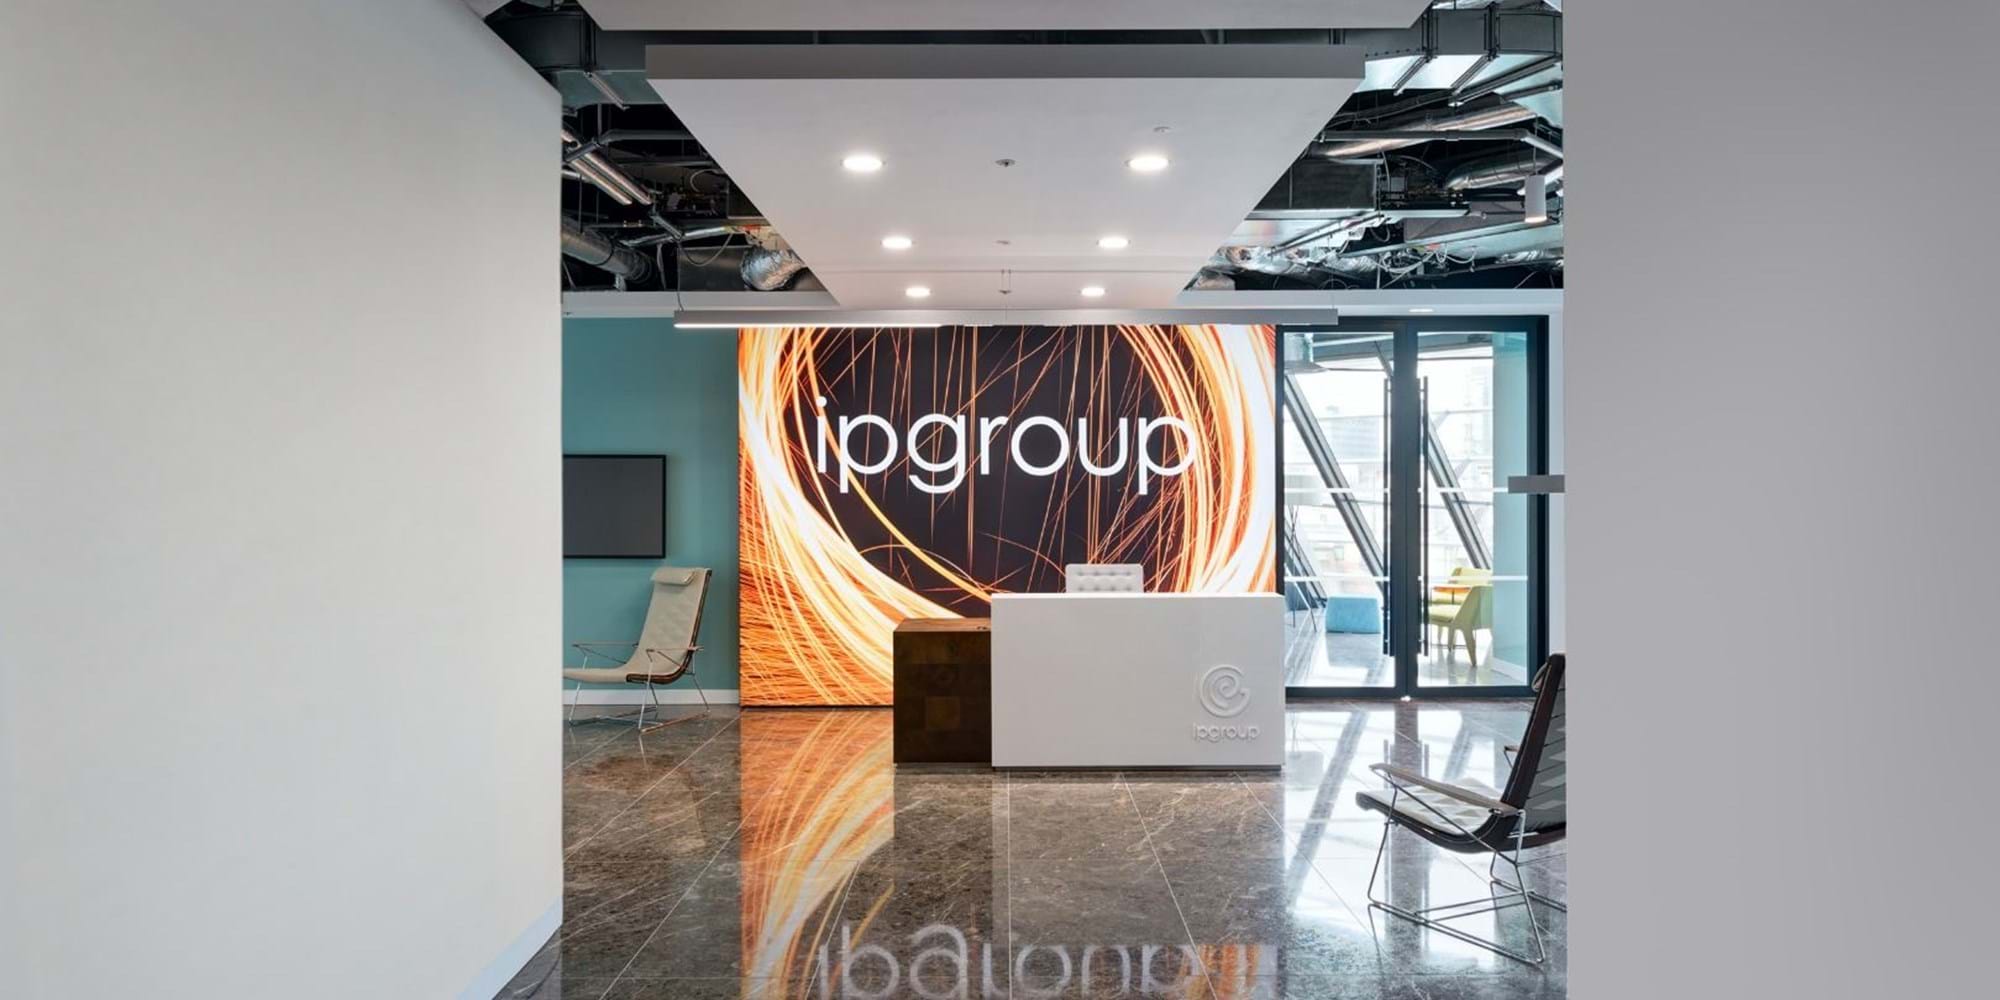 Modus Workspace office design, fit out and refurbishment - IPG - IPG 01 amended highres sRGB.jpg